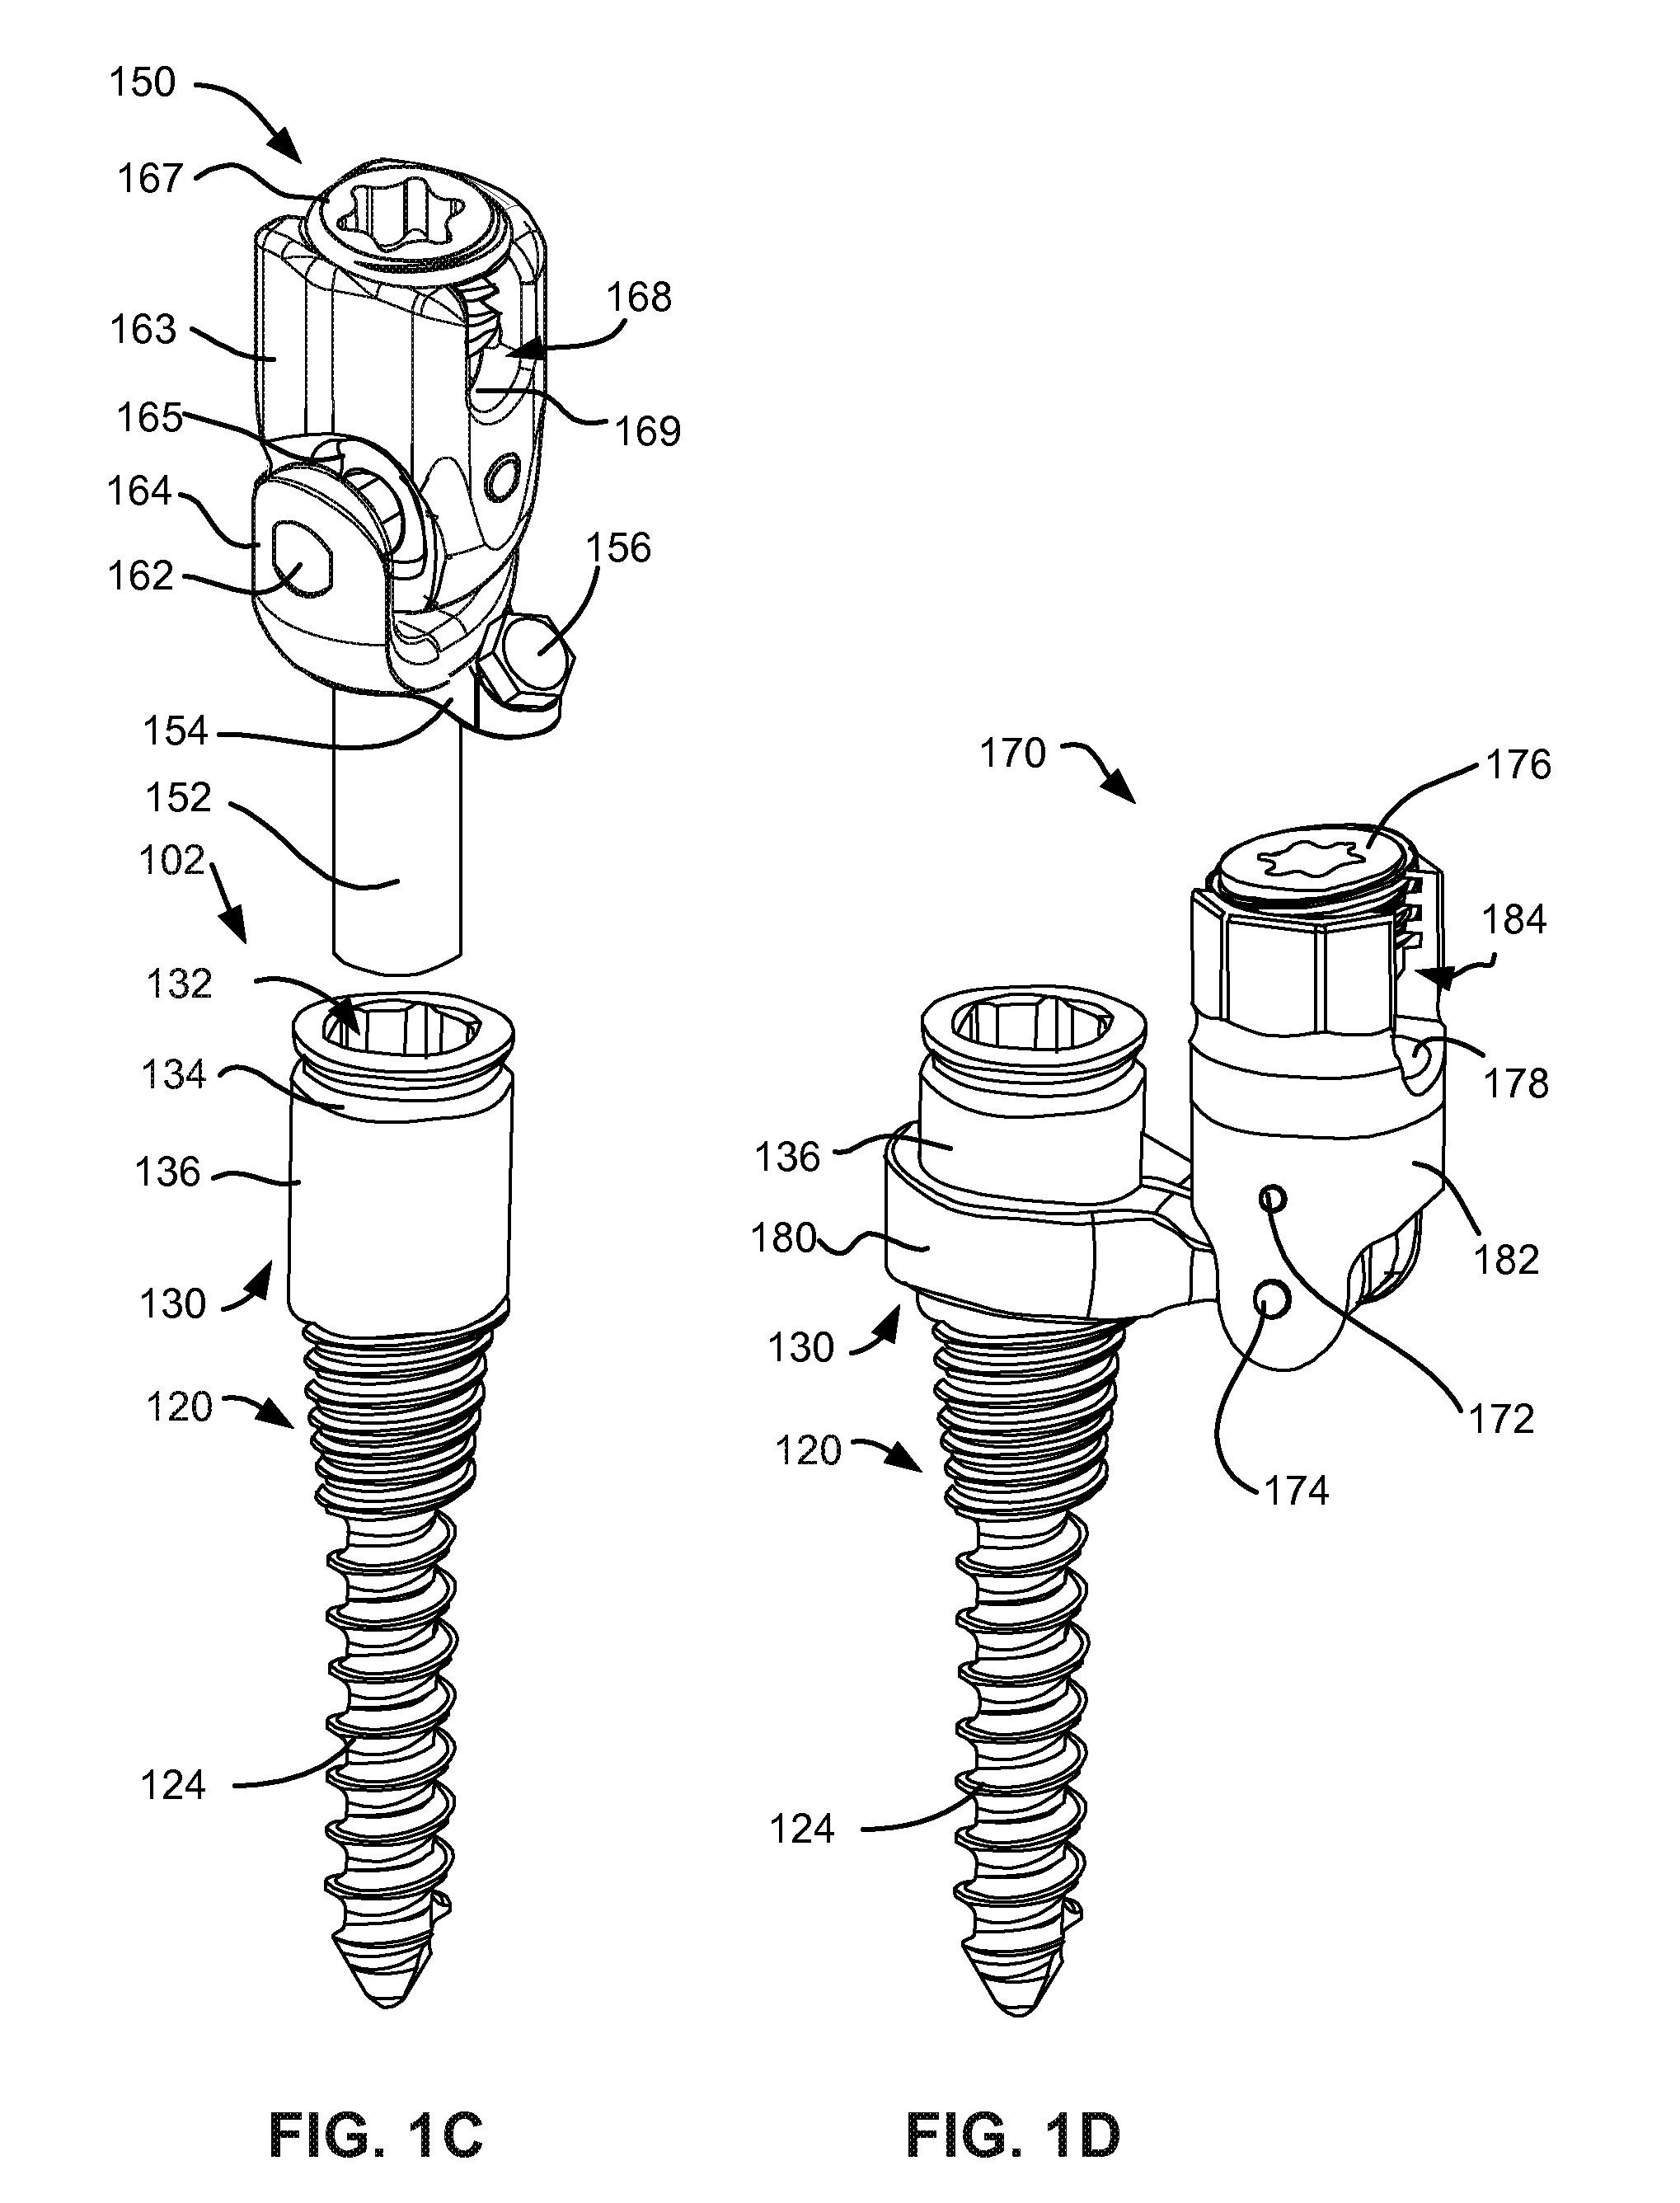 Load-sharing bone anchor having a deflectable post with a compliant ring and method for stabilization of the spine